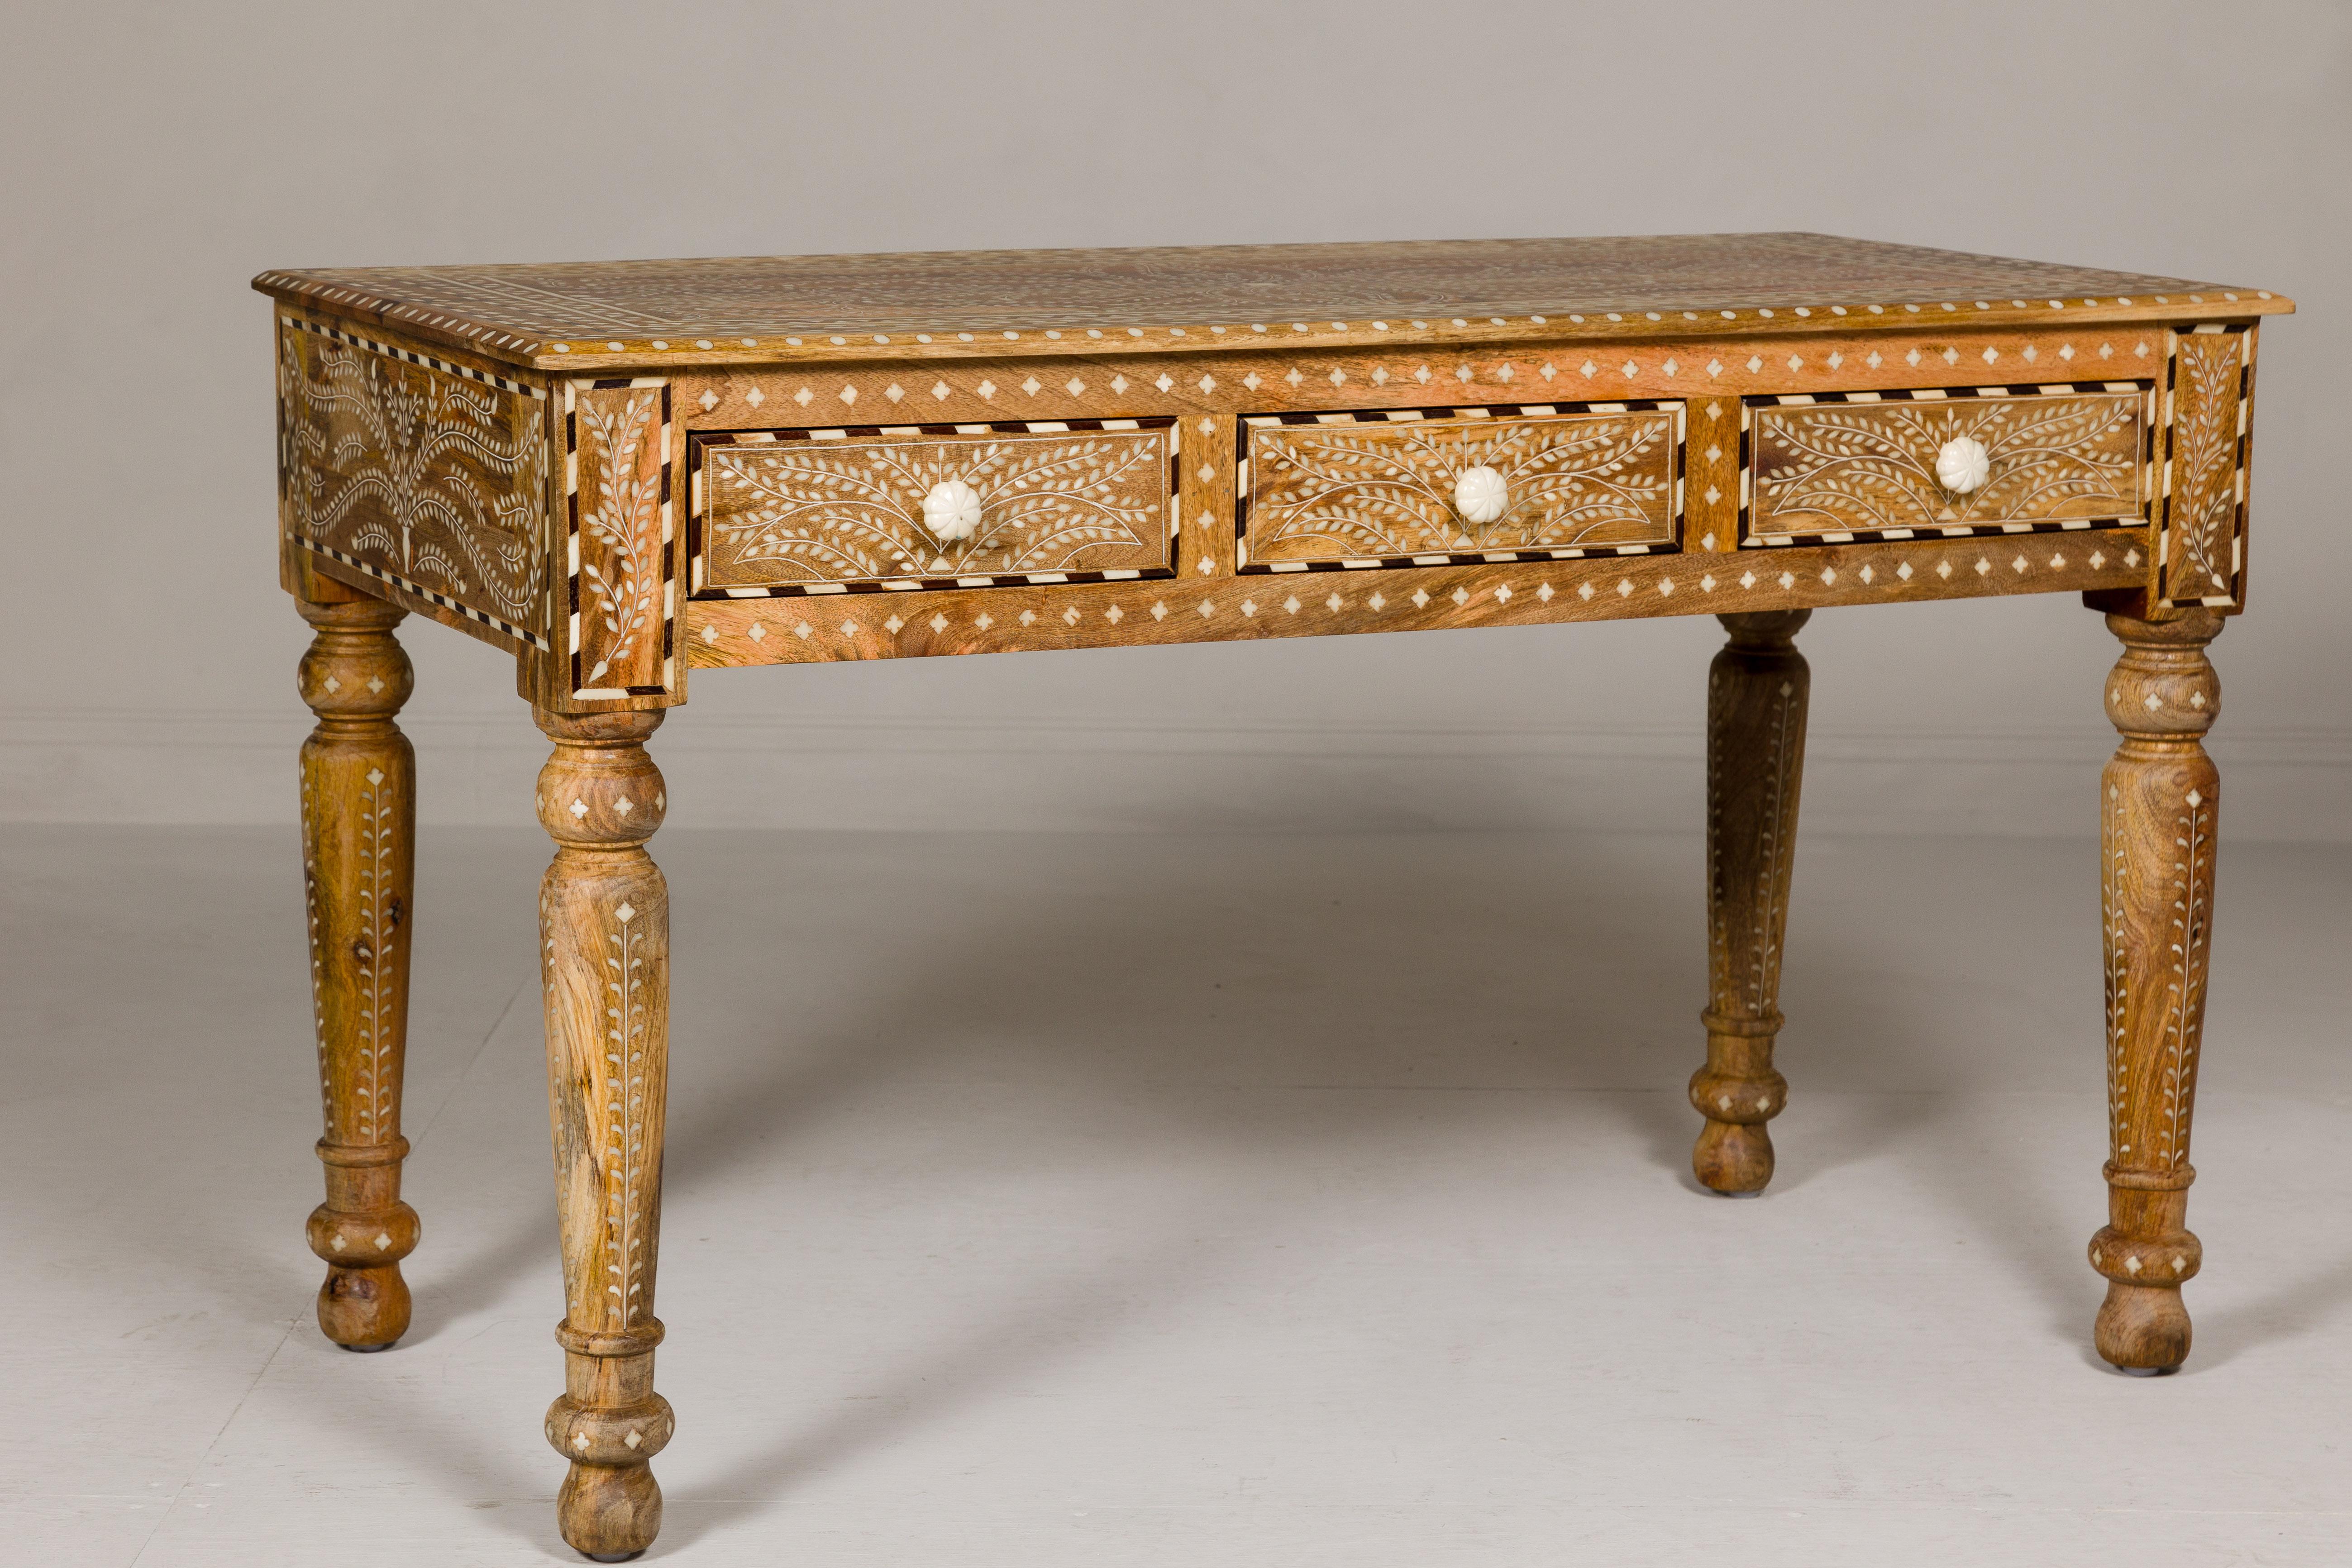 Anglo Indian Style Mango Wood Desk with Drawers, Bone Inlay and Light Patina For Sale 3